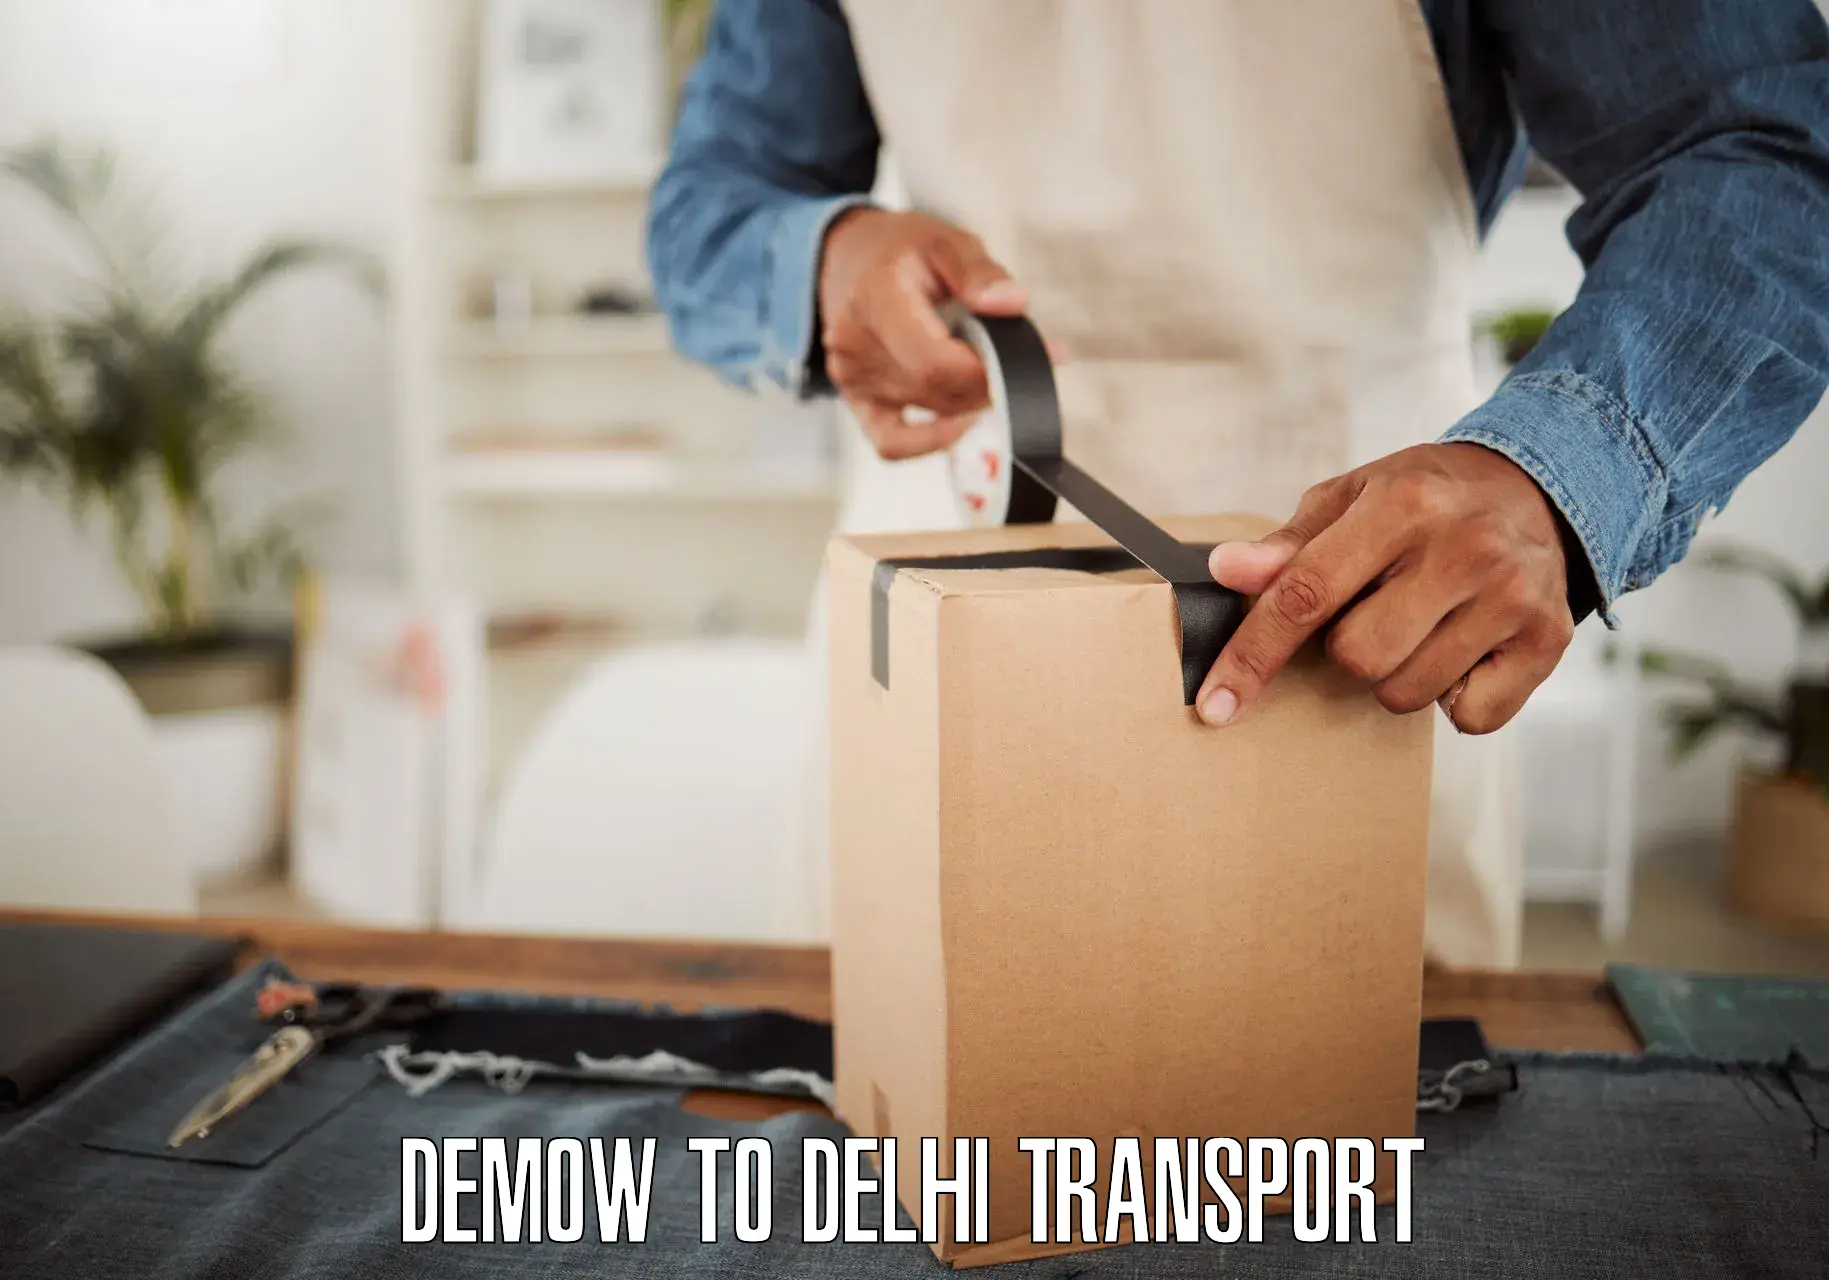 Interstate transport services Demow to NCR